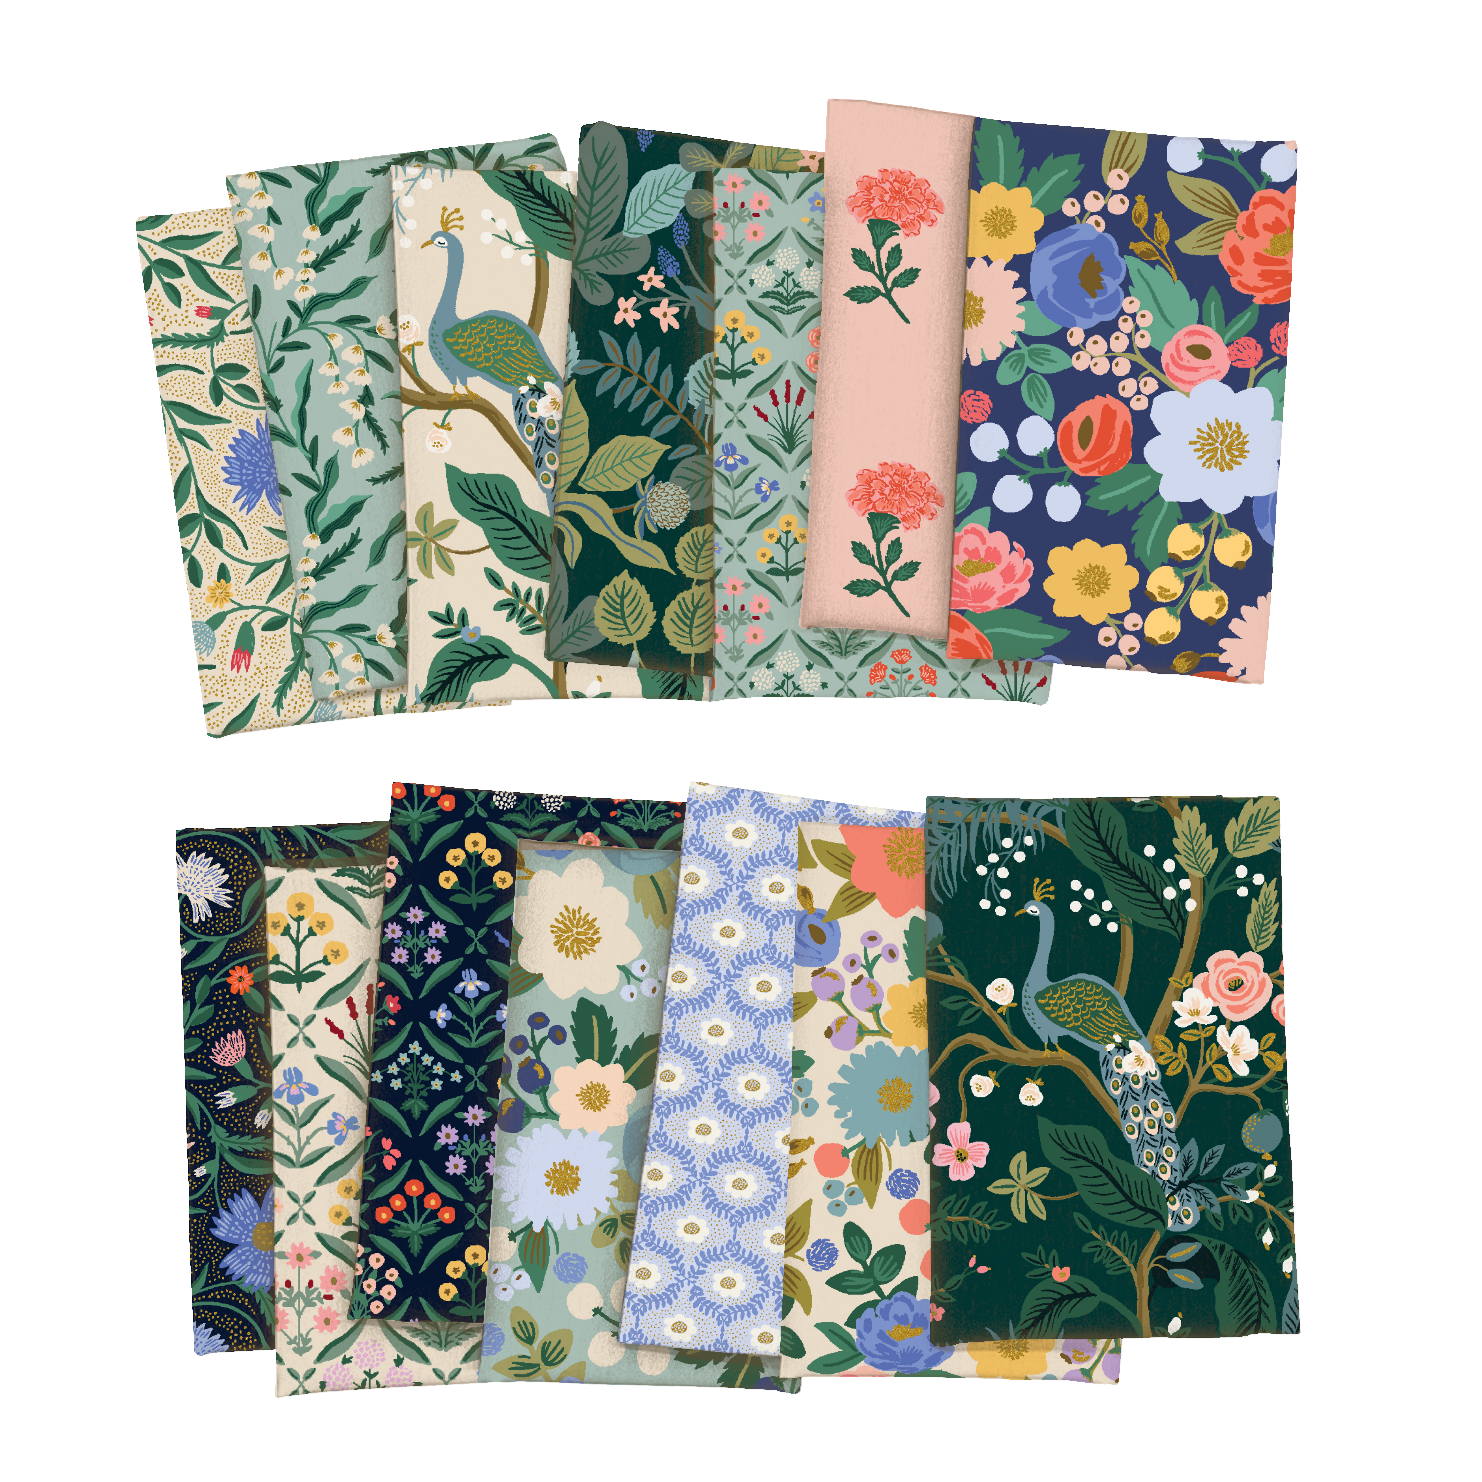 Vintage Garden by Rifle Paper Co. for Cotton + Steel